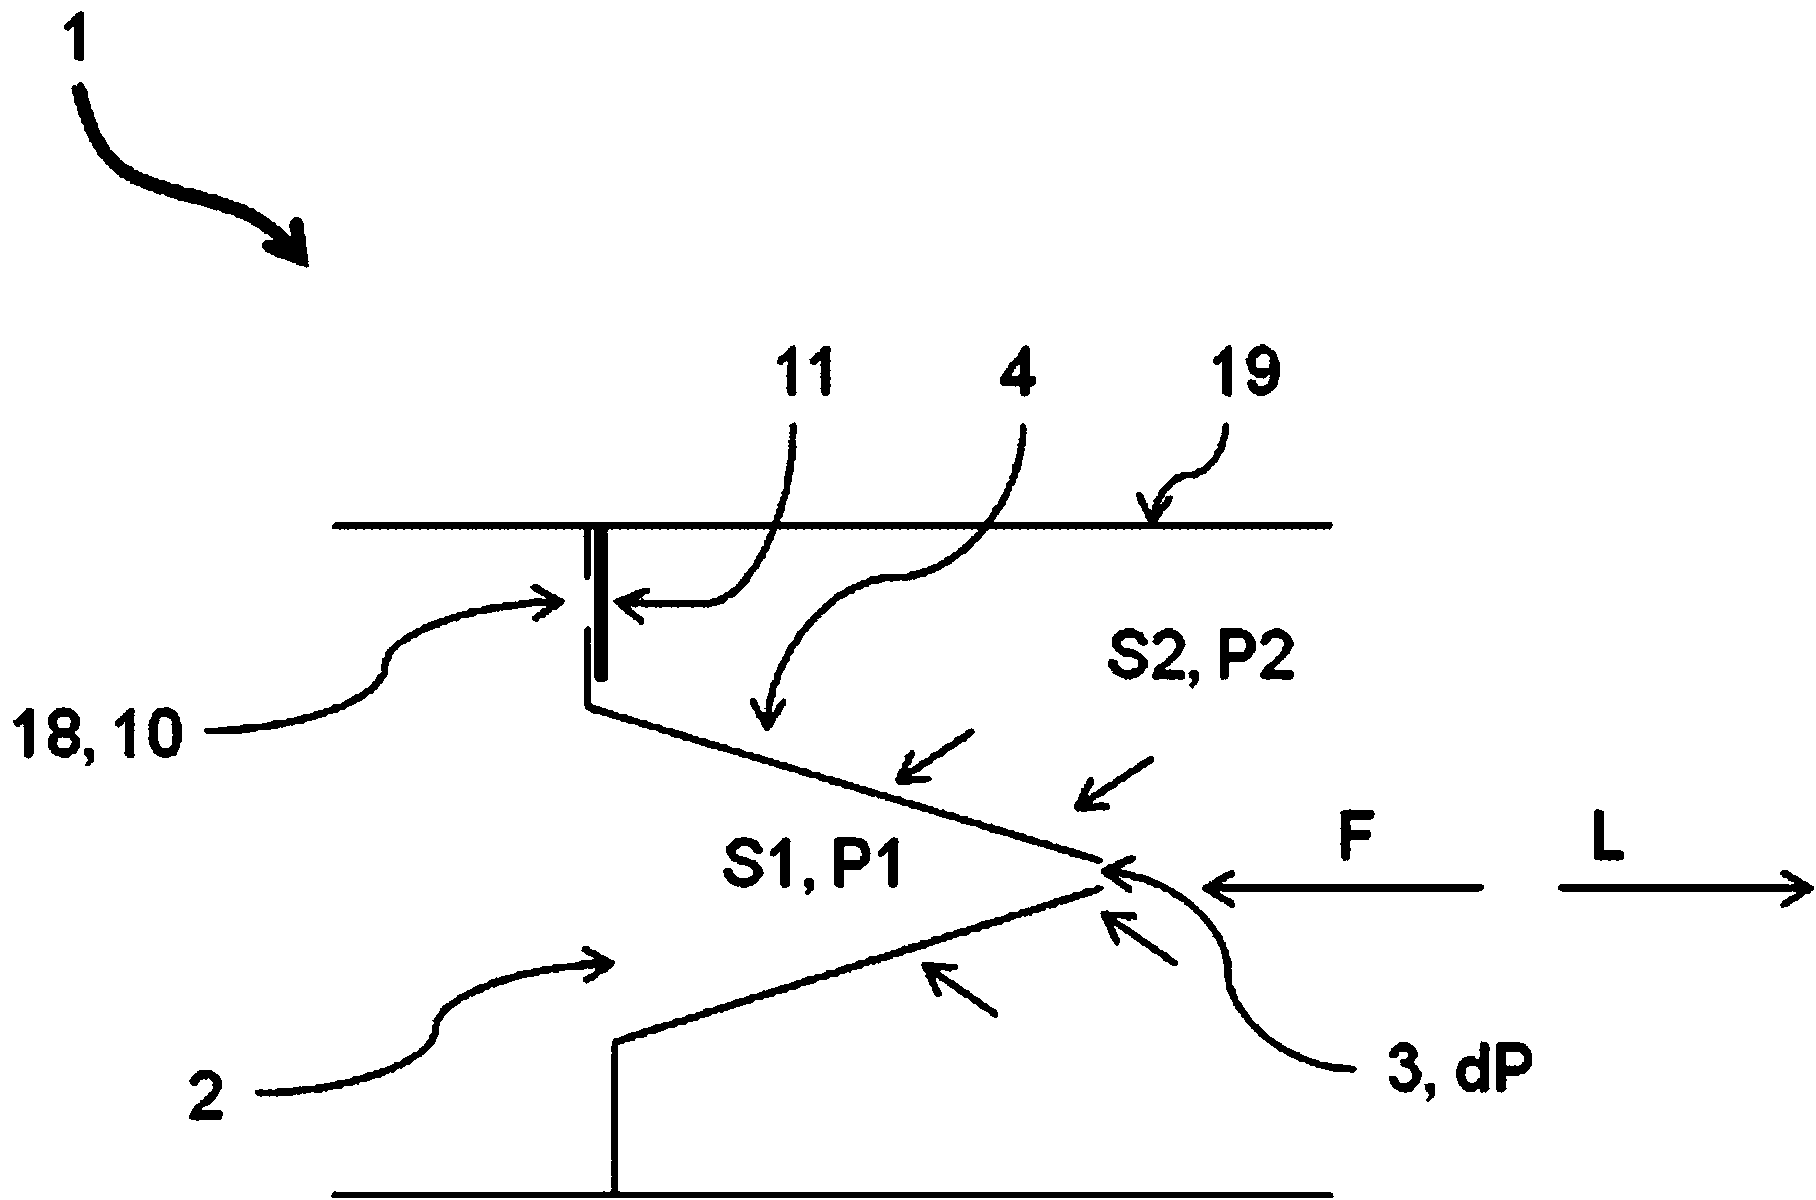 Valve and solar collector device which operate according to the thermosiphon principle